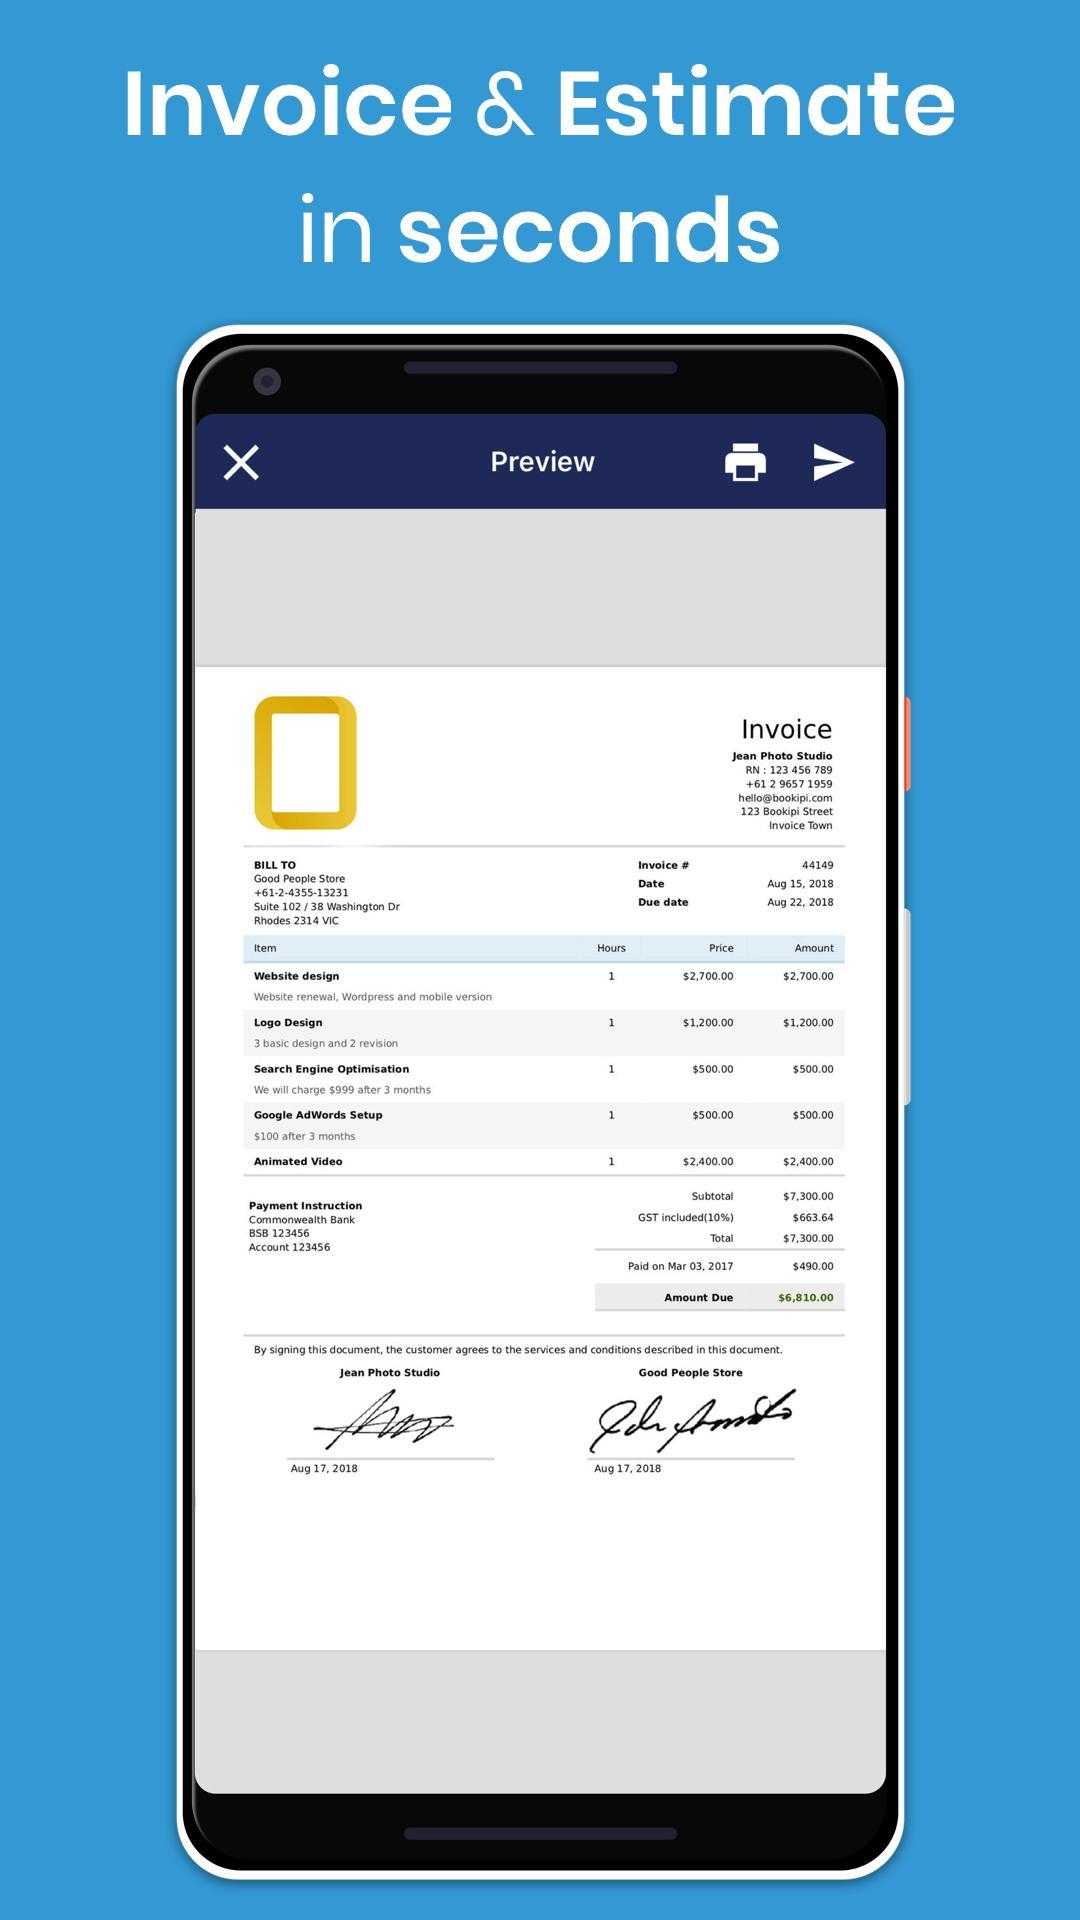 Free Invoice & Estimate Template Generator For Android – Apk Intended For Free Invoice Template For Android